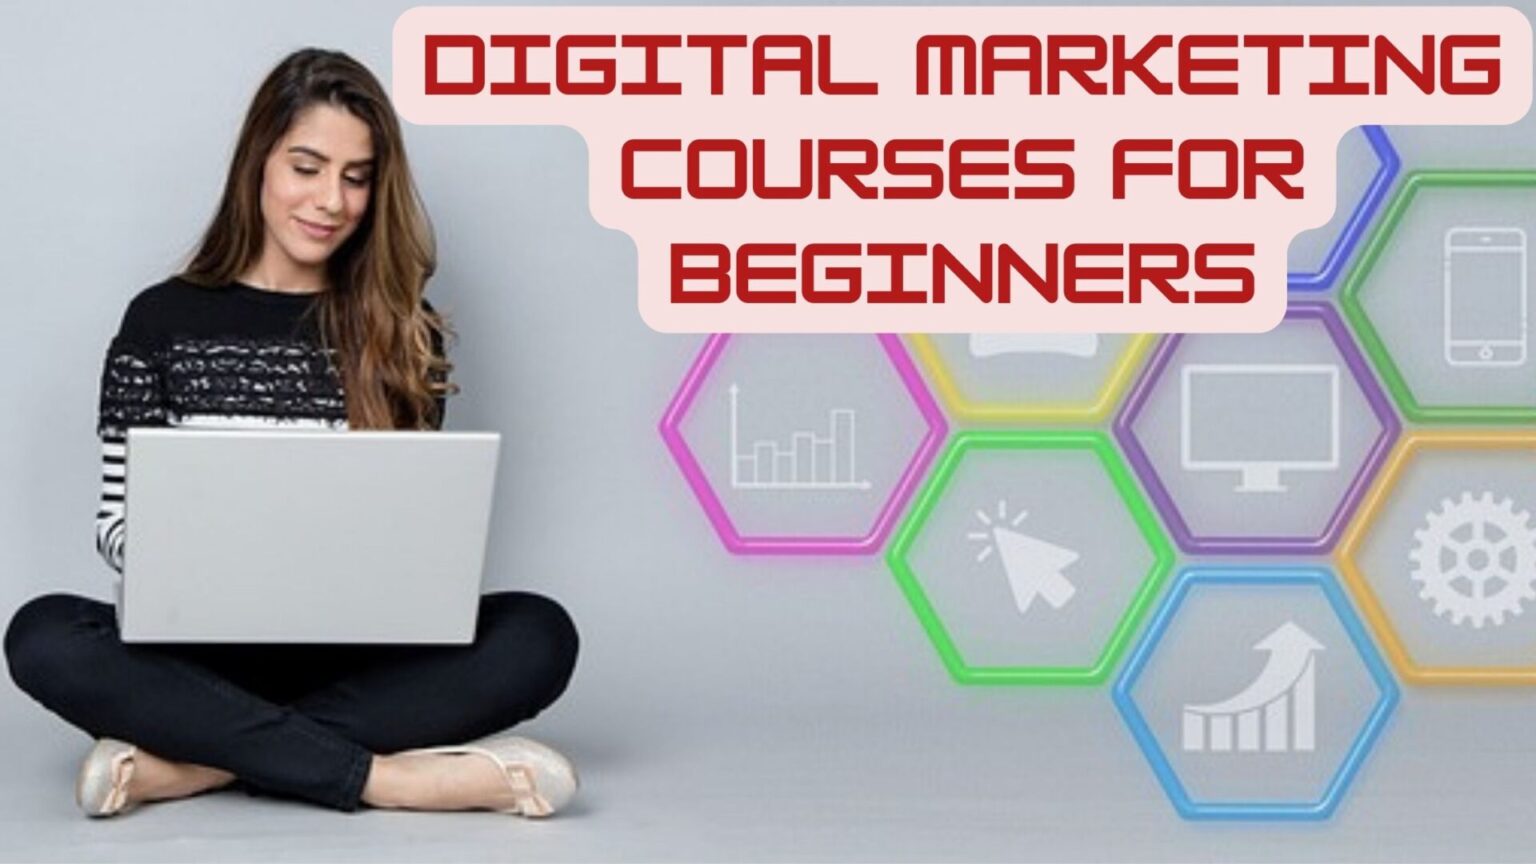 Digital Marketing Courses for Beginners